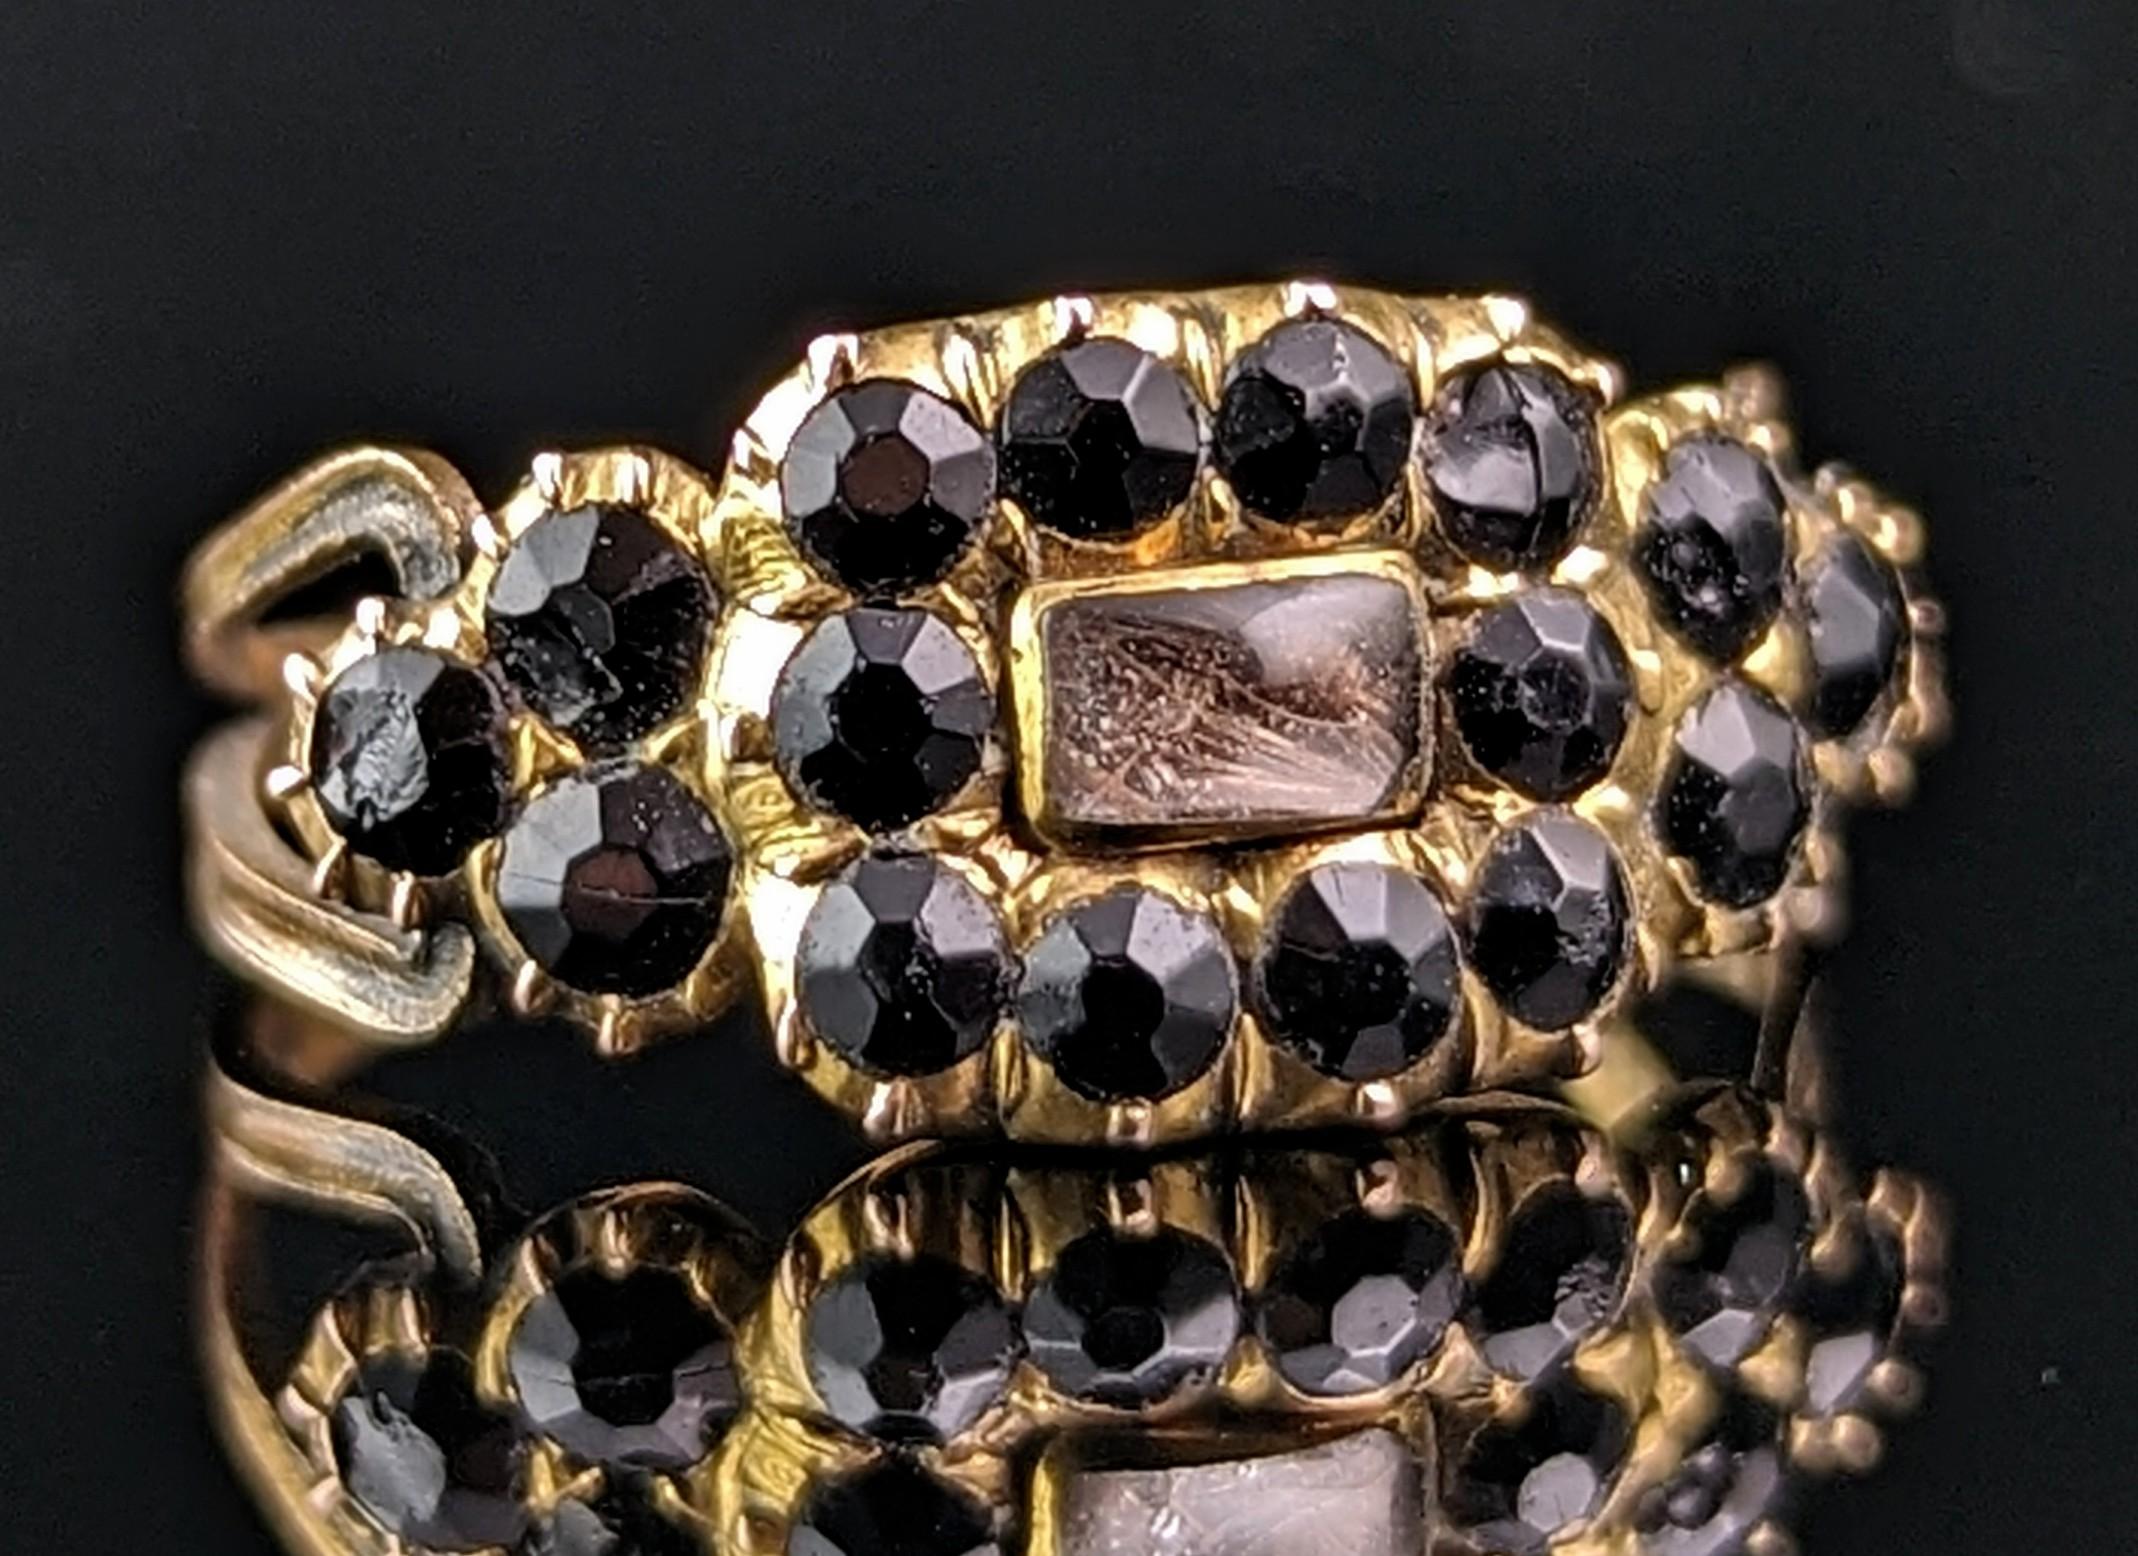 A bittersweet and beautiful Regency era mourning ring.

The ring has a rounded rectangular face with a domed crystal panel enclosing hair beneath the panel.

Surrounding this is a halo of Vauxhall glass stones in rich inky black that lead down to